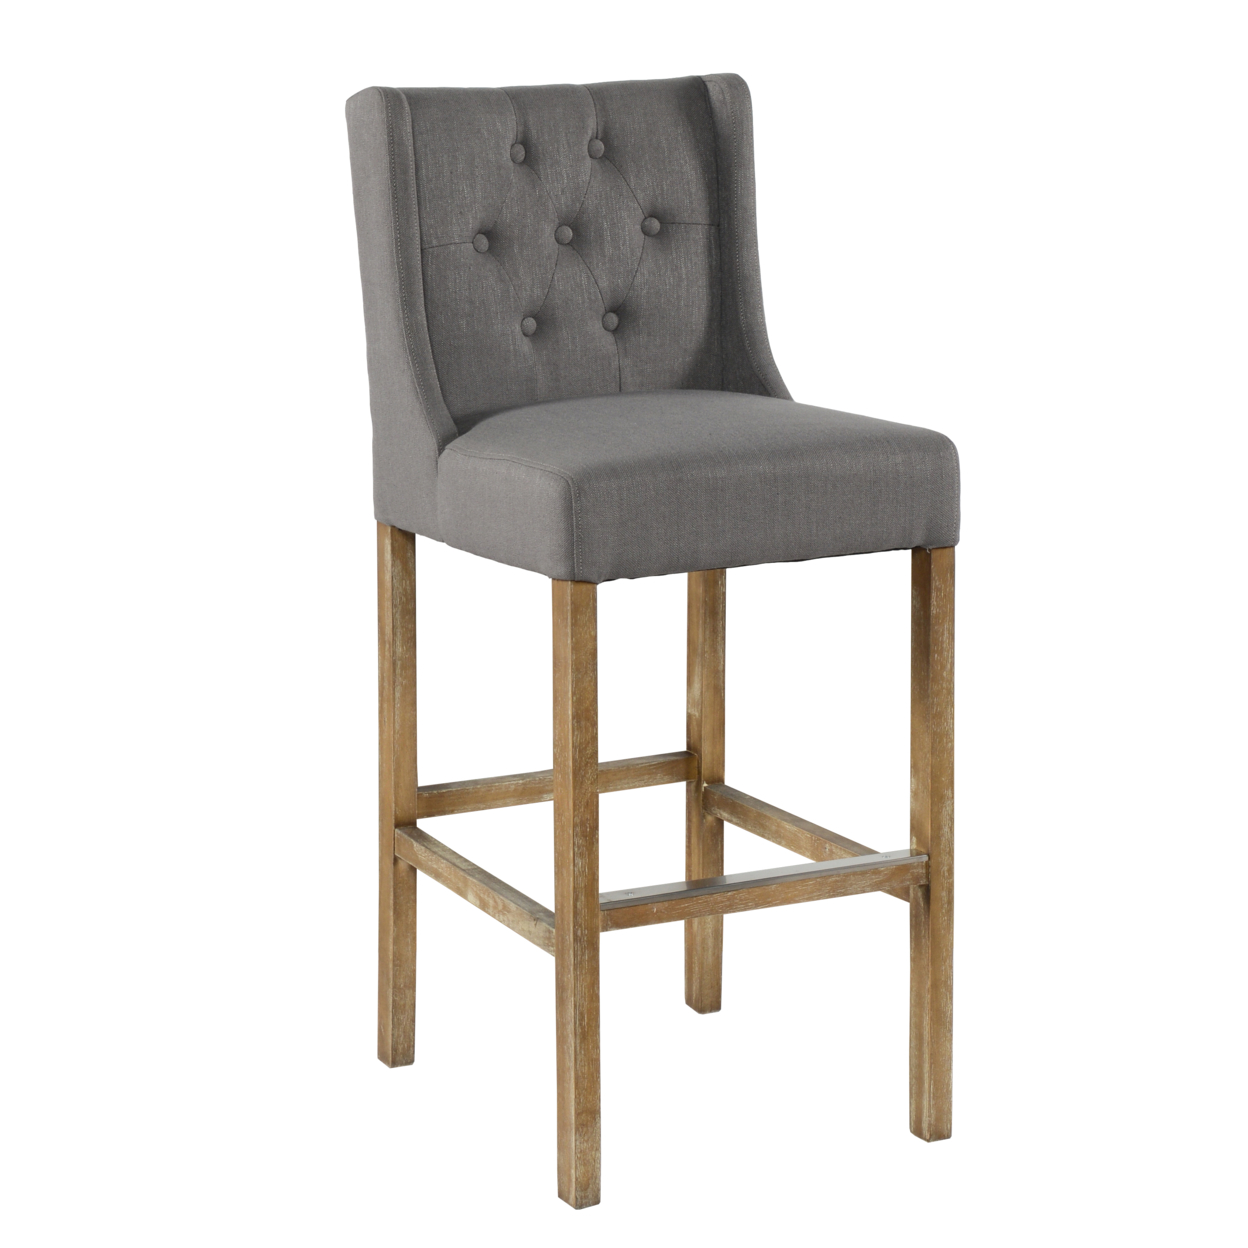 Wooden Barstool With Padded Seat, Button Tufted, Wing Back, Set Of 2, Gray And Brown- Saltoro Sherpi